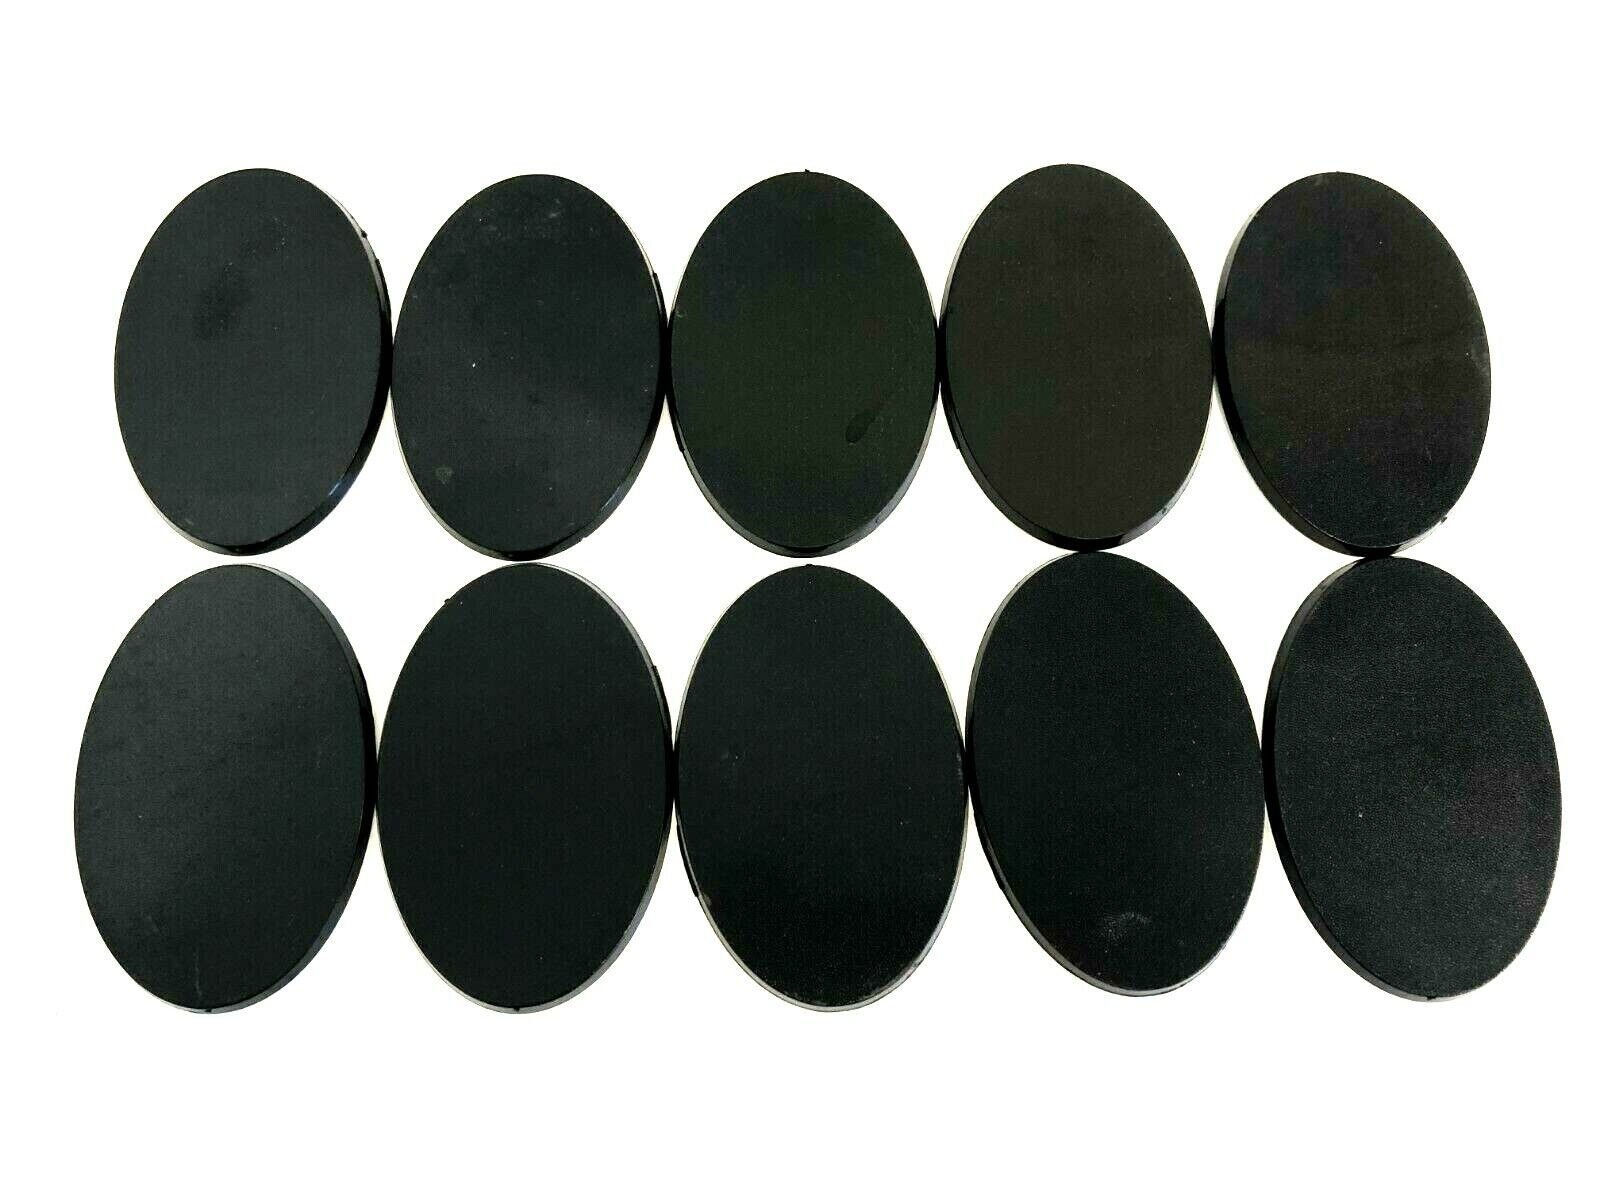 Lot of 10 75mm x 42mm Oval Bases For Warhammer 40k & AoS Games Workshop  Unbranded does not apply